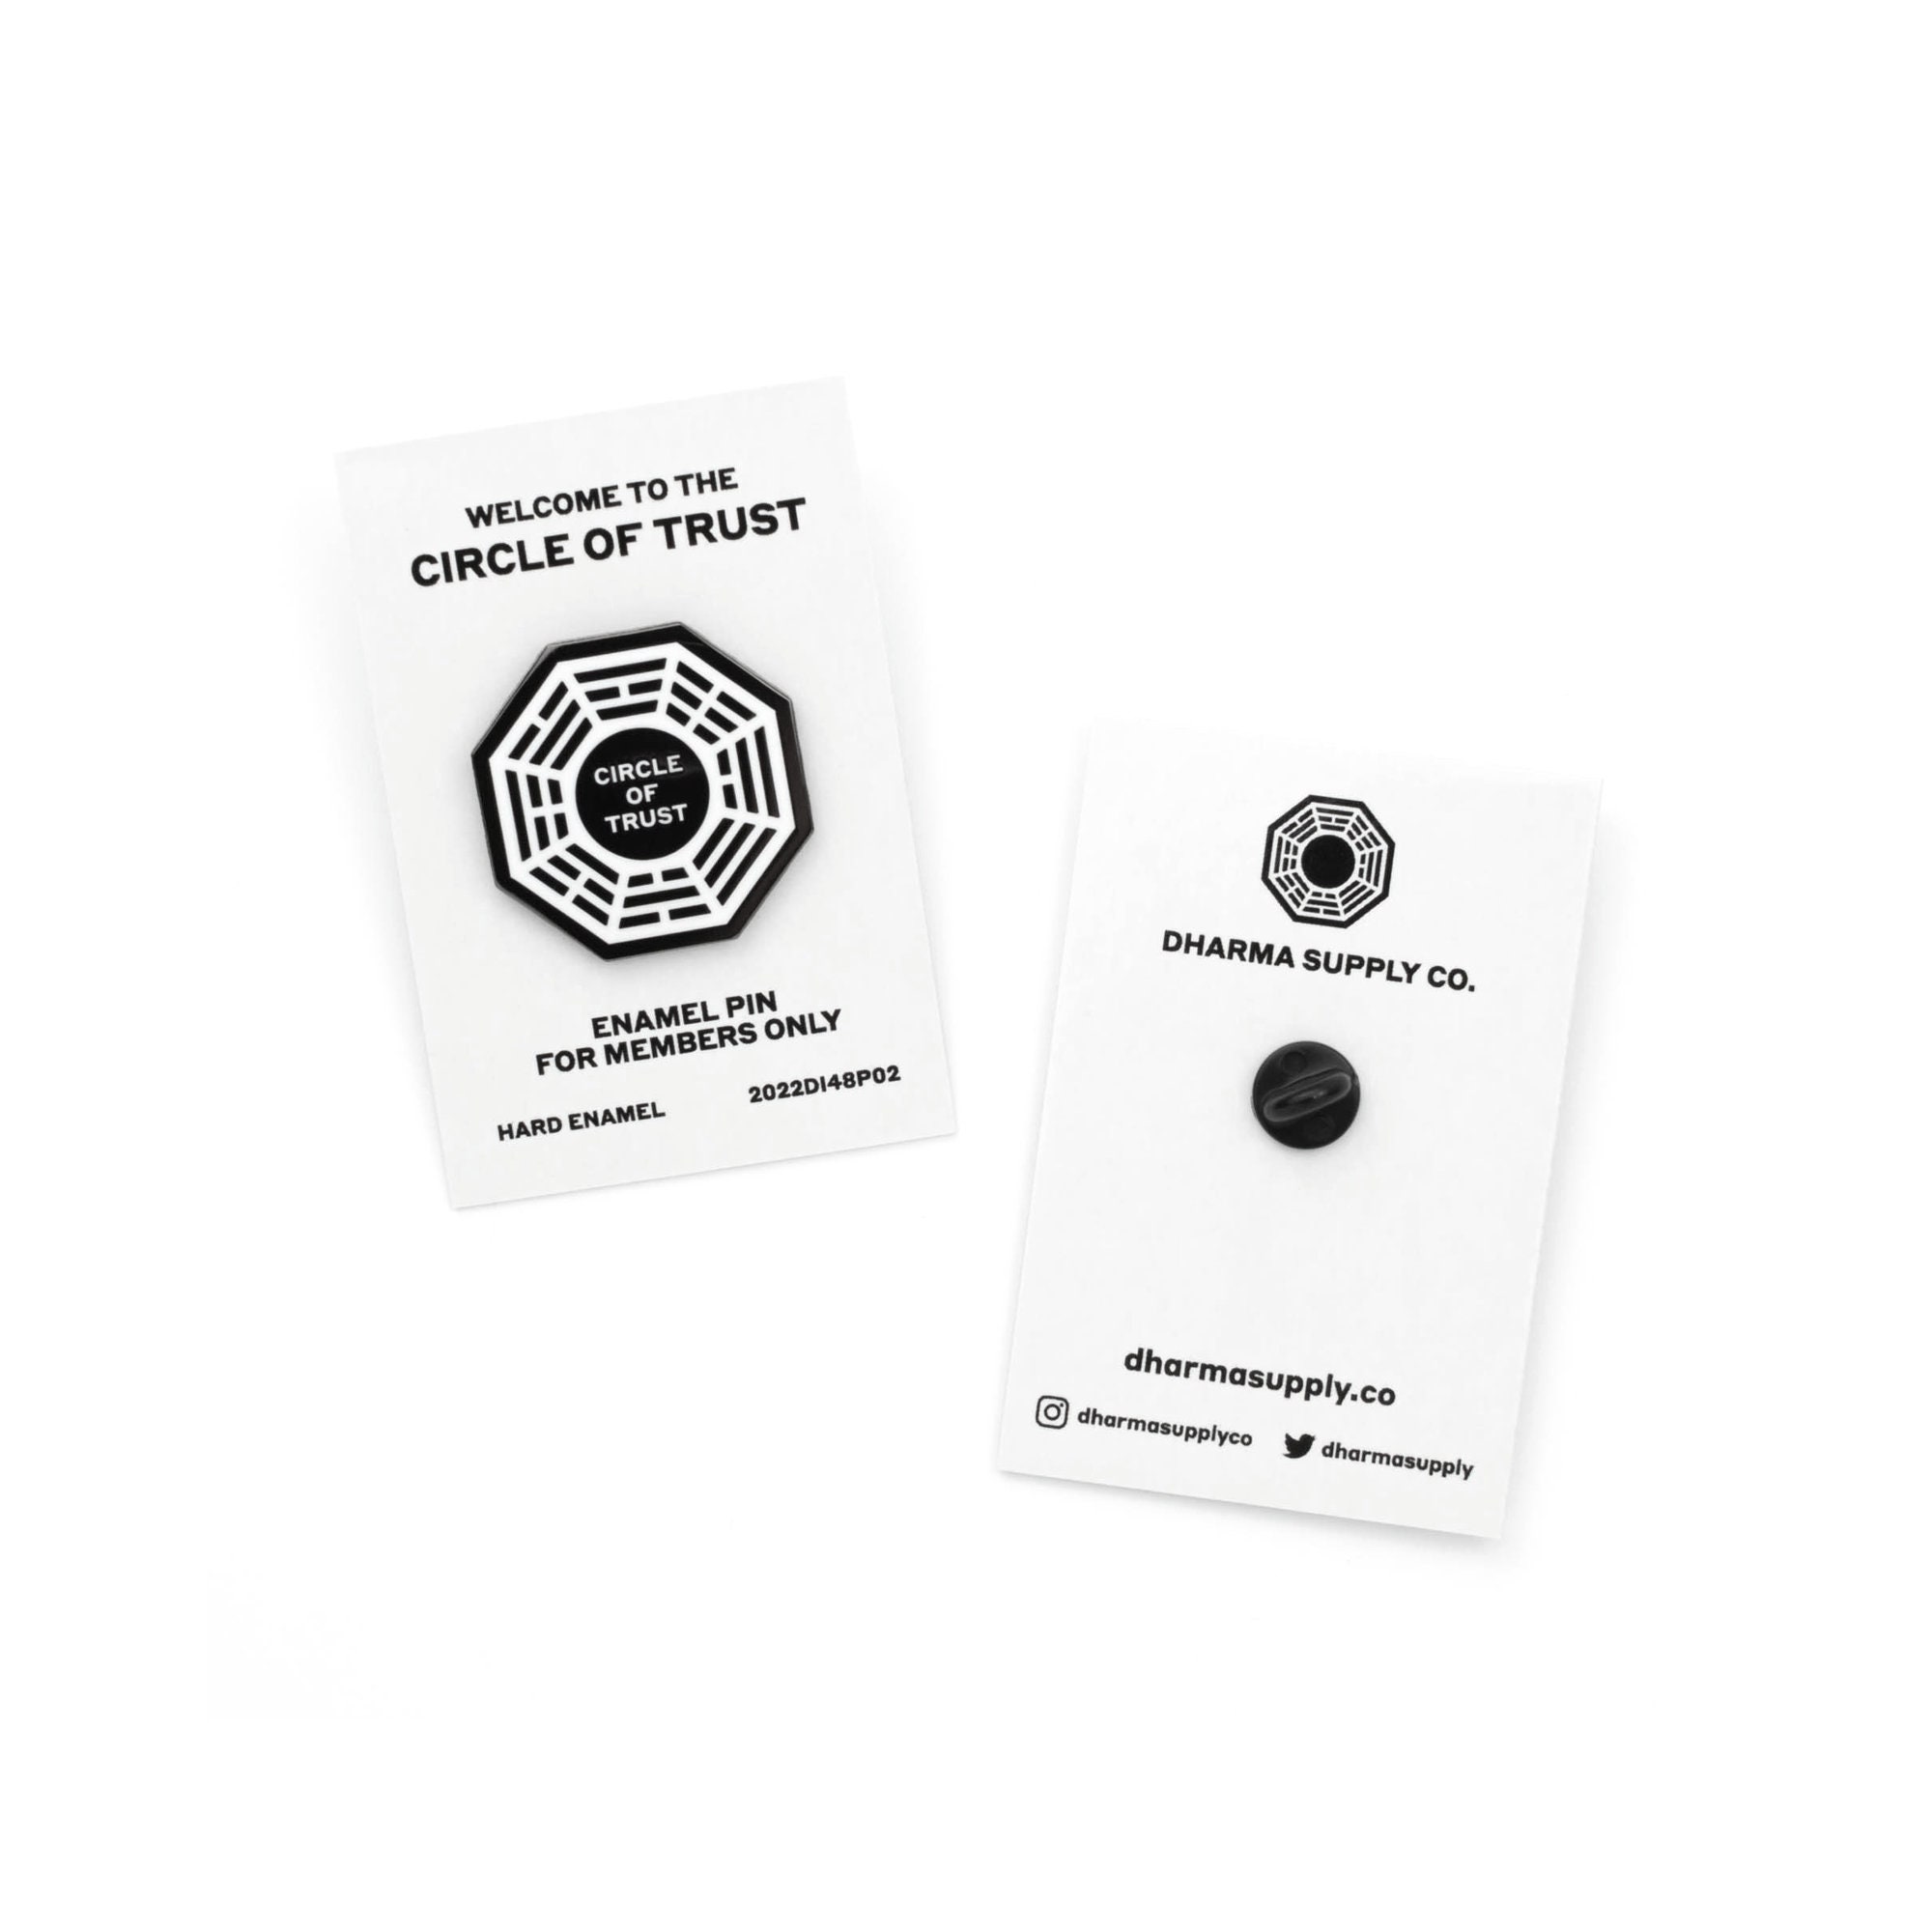 LOST Dharma Collectibles LOST Dharma Initiative Station Enamel Collector Pin  Set 